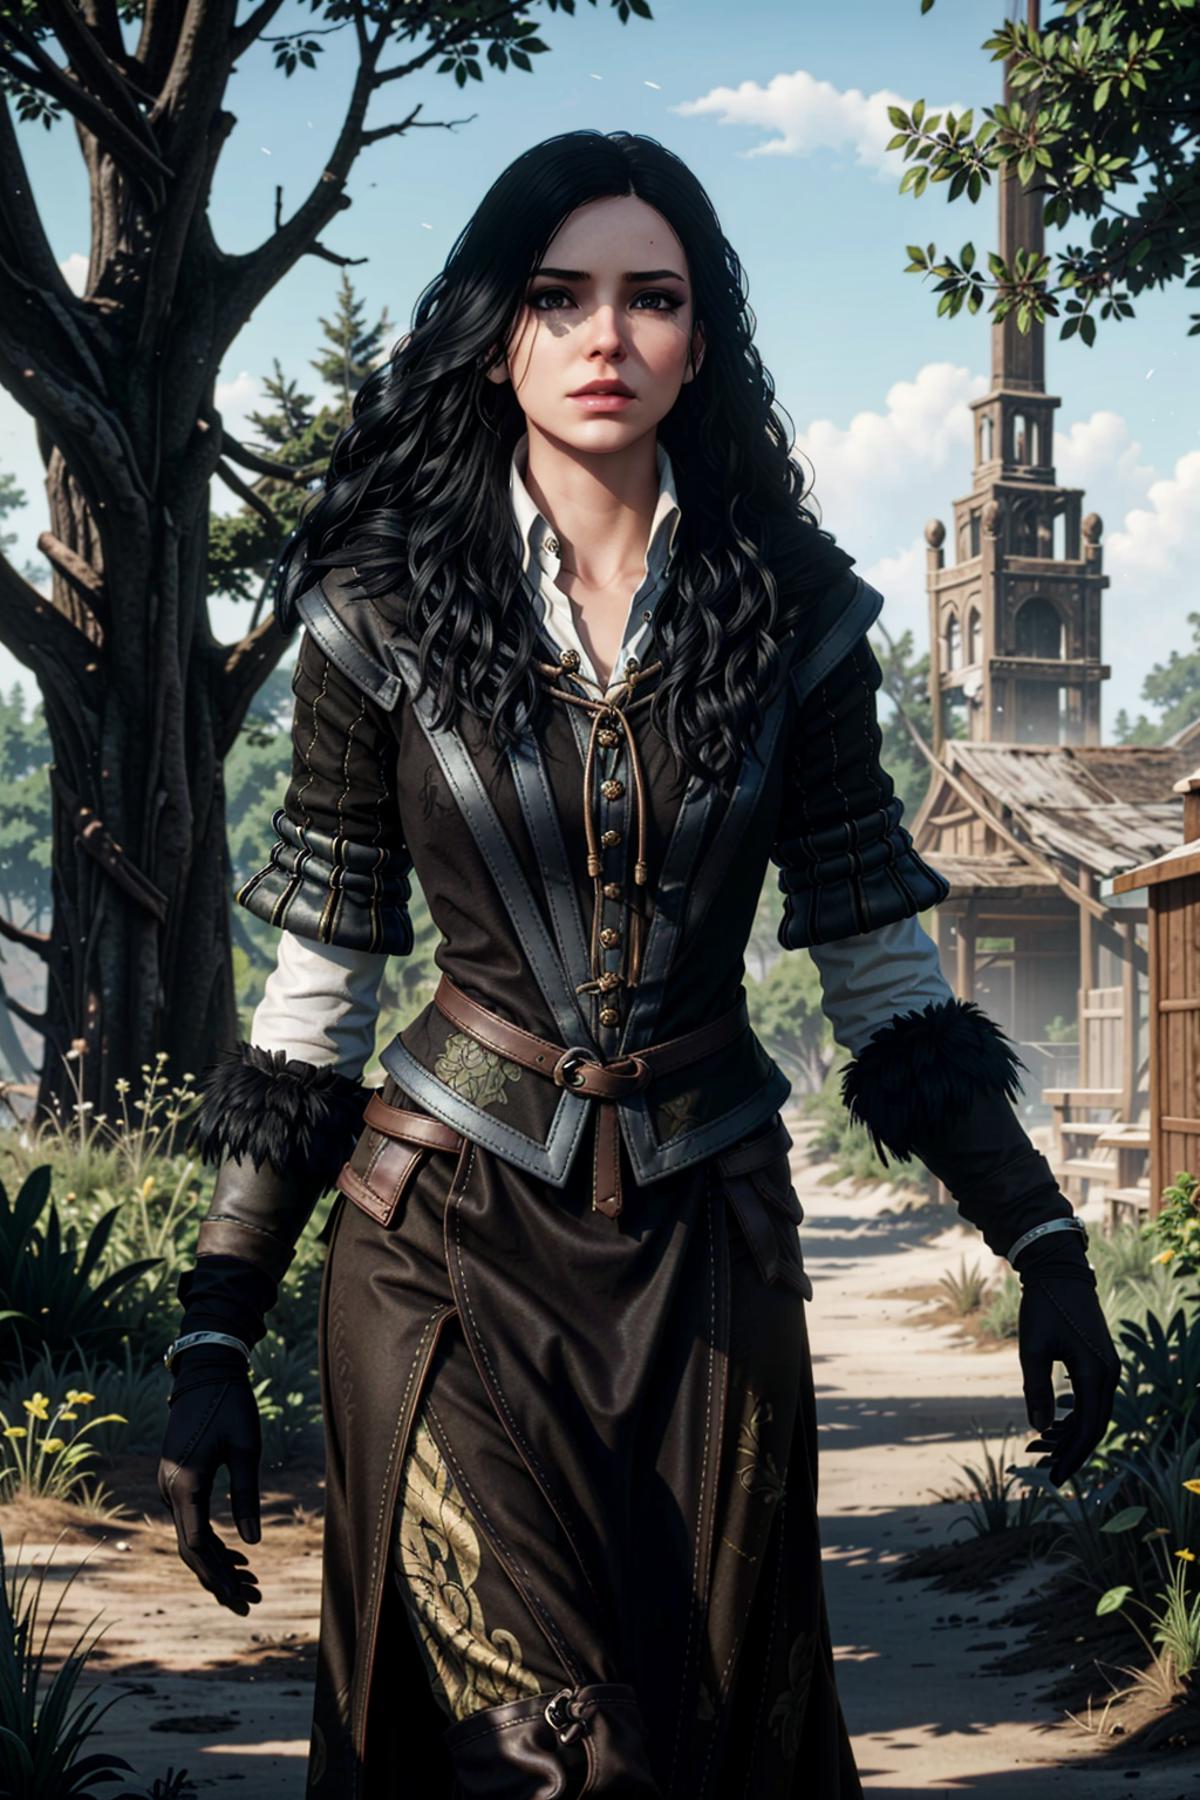 Yennefer from The Witcher image by BloodRedKittie